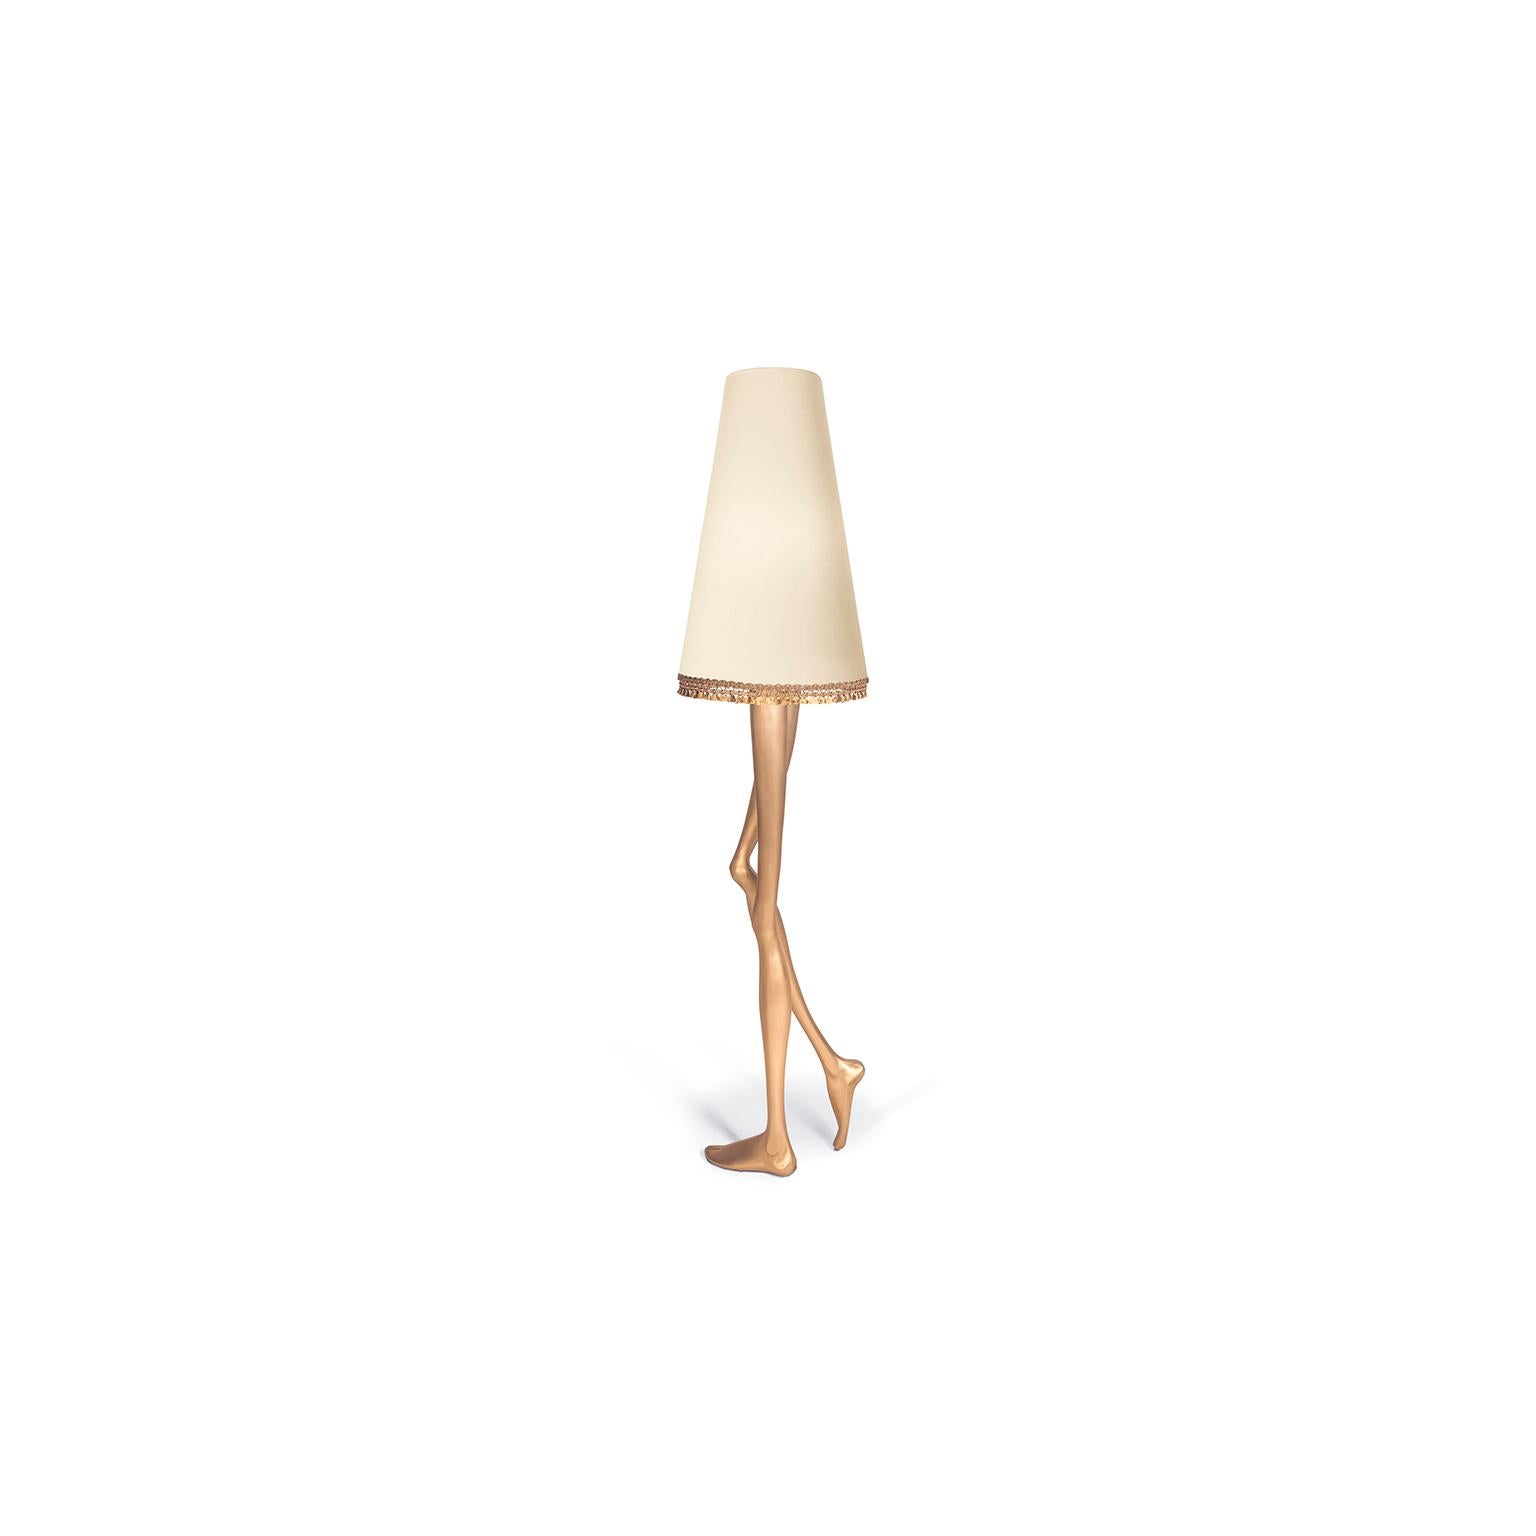 Inspiration:  
Marilyn Monroe, the sexiest Pin-up of the 1950s, inspired a piece of Art & Design. The design of the Monroe lamp captures the essence of her image and the sensuality of her legs. The lampshade and the gold tassel fringe complement the